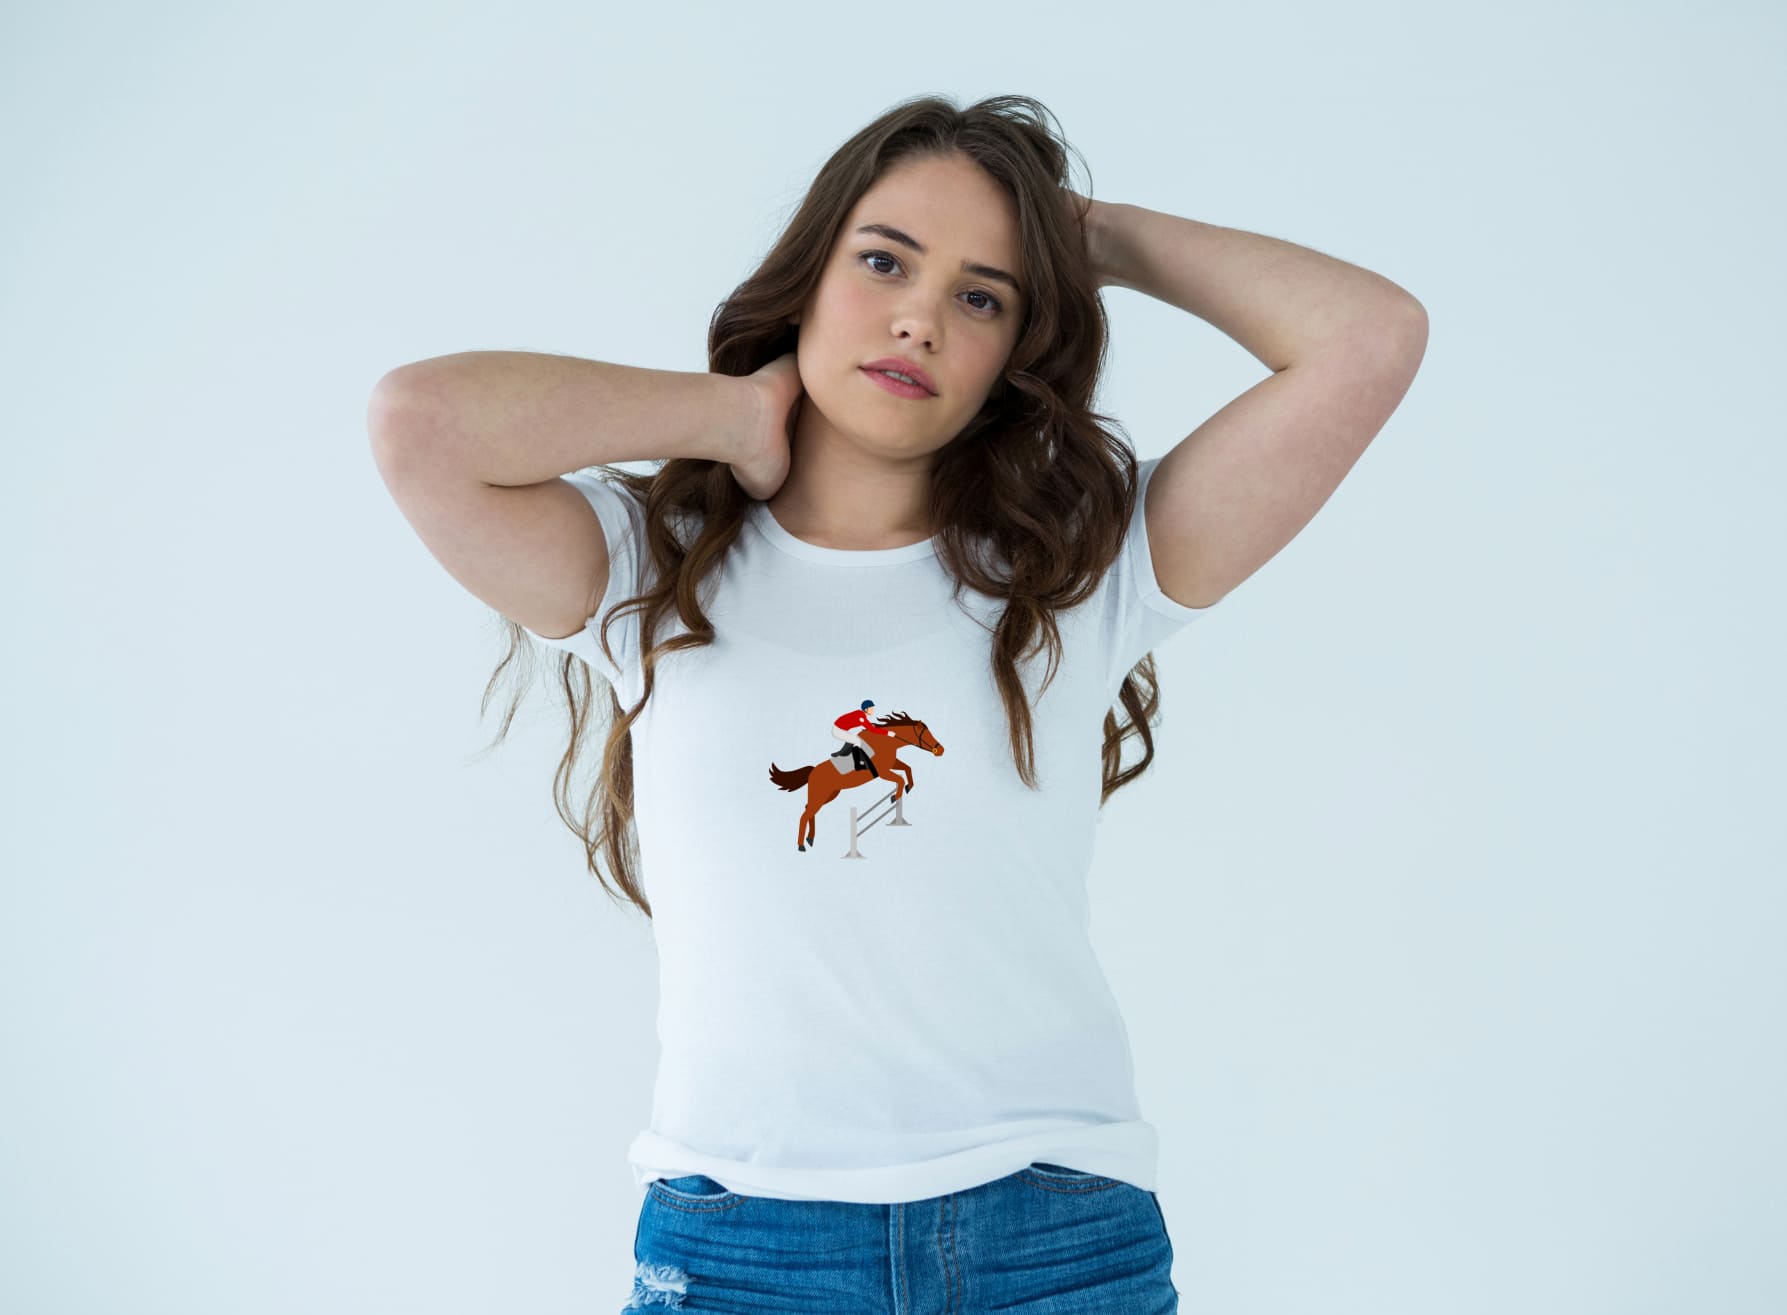 White t-shirt with an image of a brown horse riding, on a girl on a light blue background.